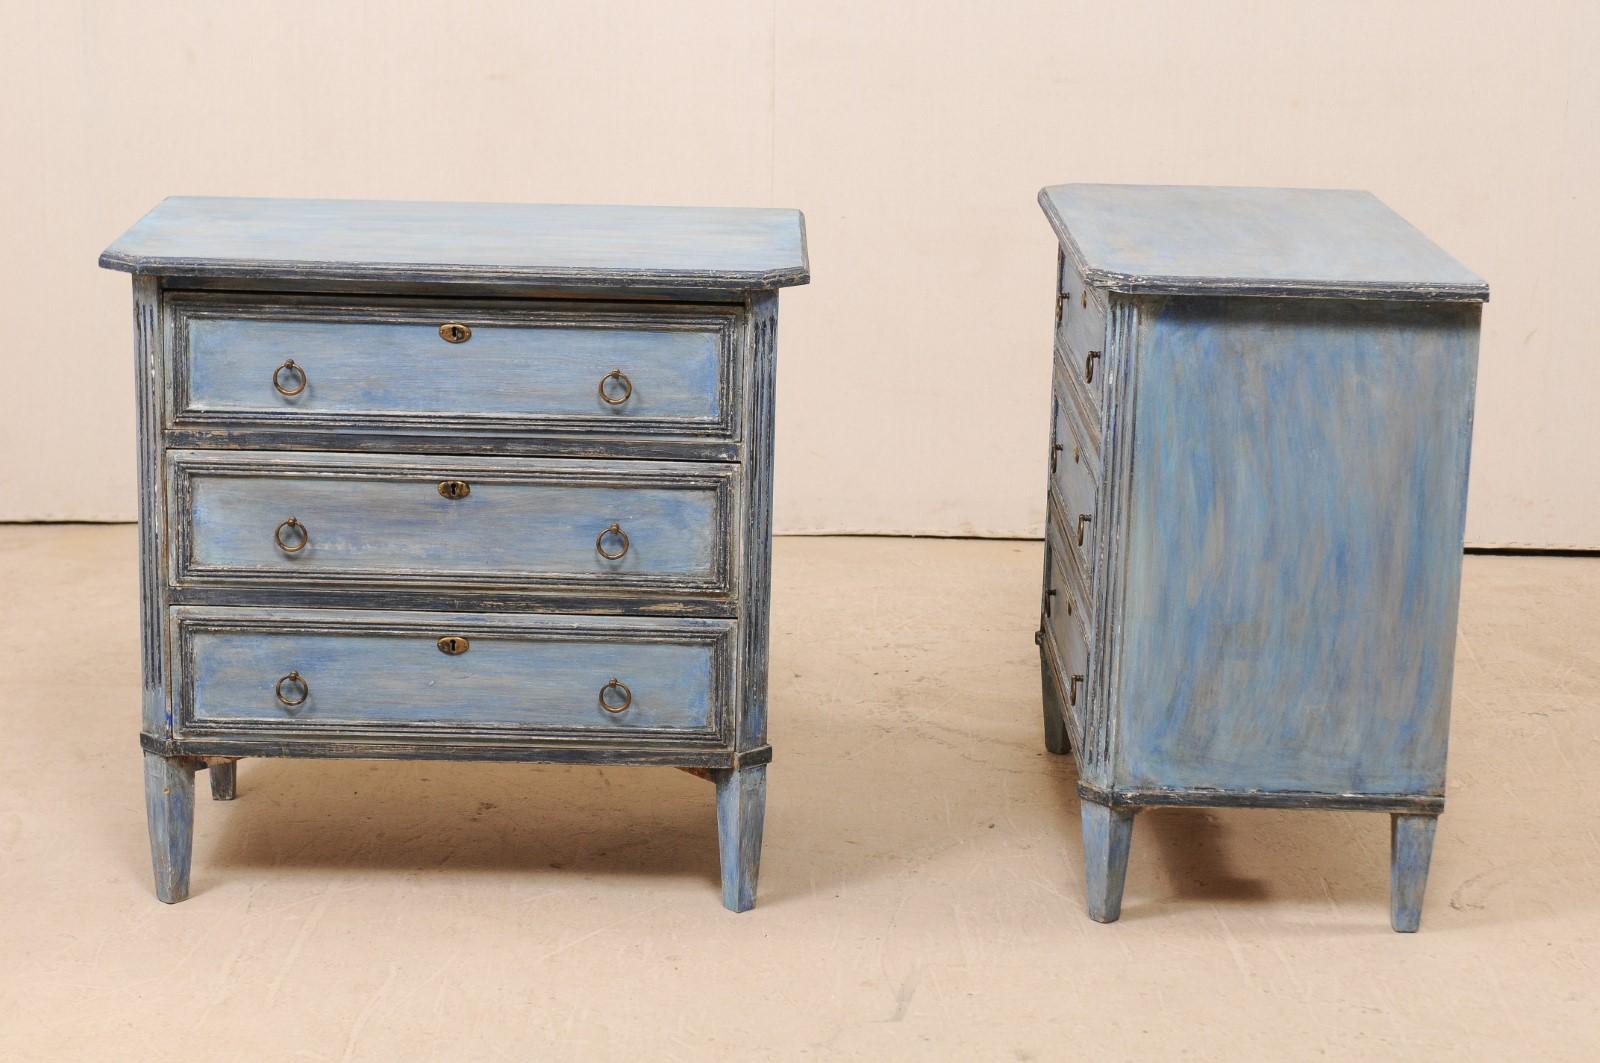 A pair of Swedish midcentury painted wood three-drawer chests. This pair of vintage chests from Sweden each feature three dovetailed drawers, trimmed in simple molding to emphasize their rectangular shapes, and are flanked by fluted side posts down